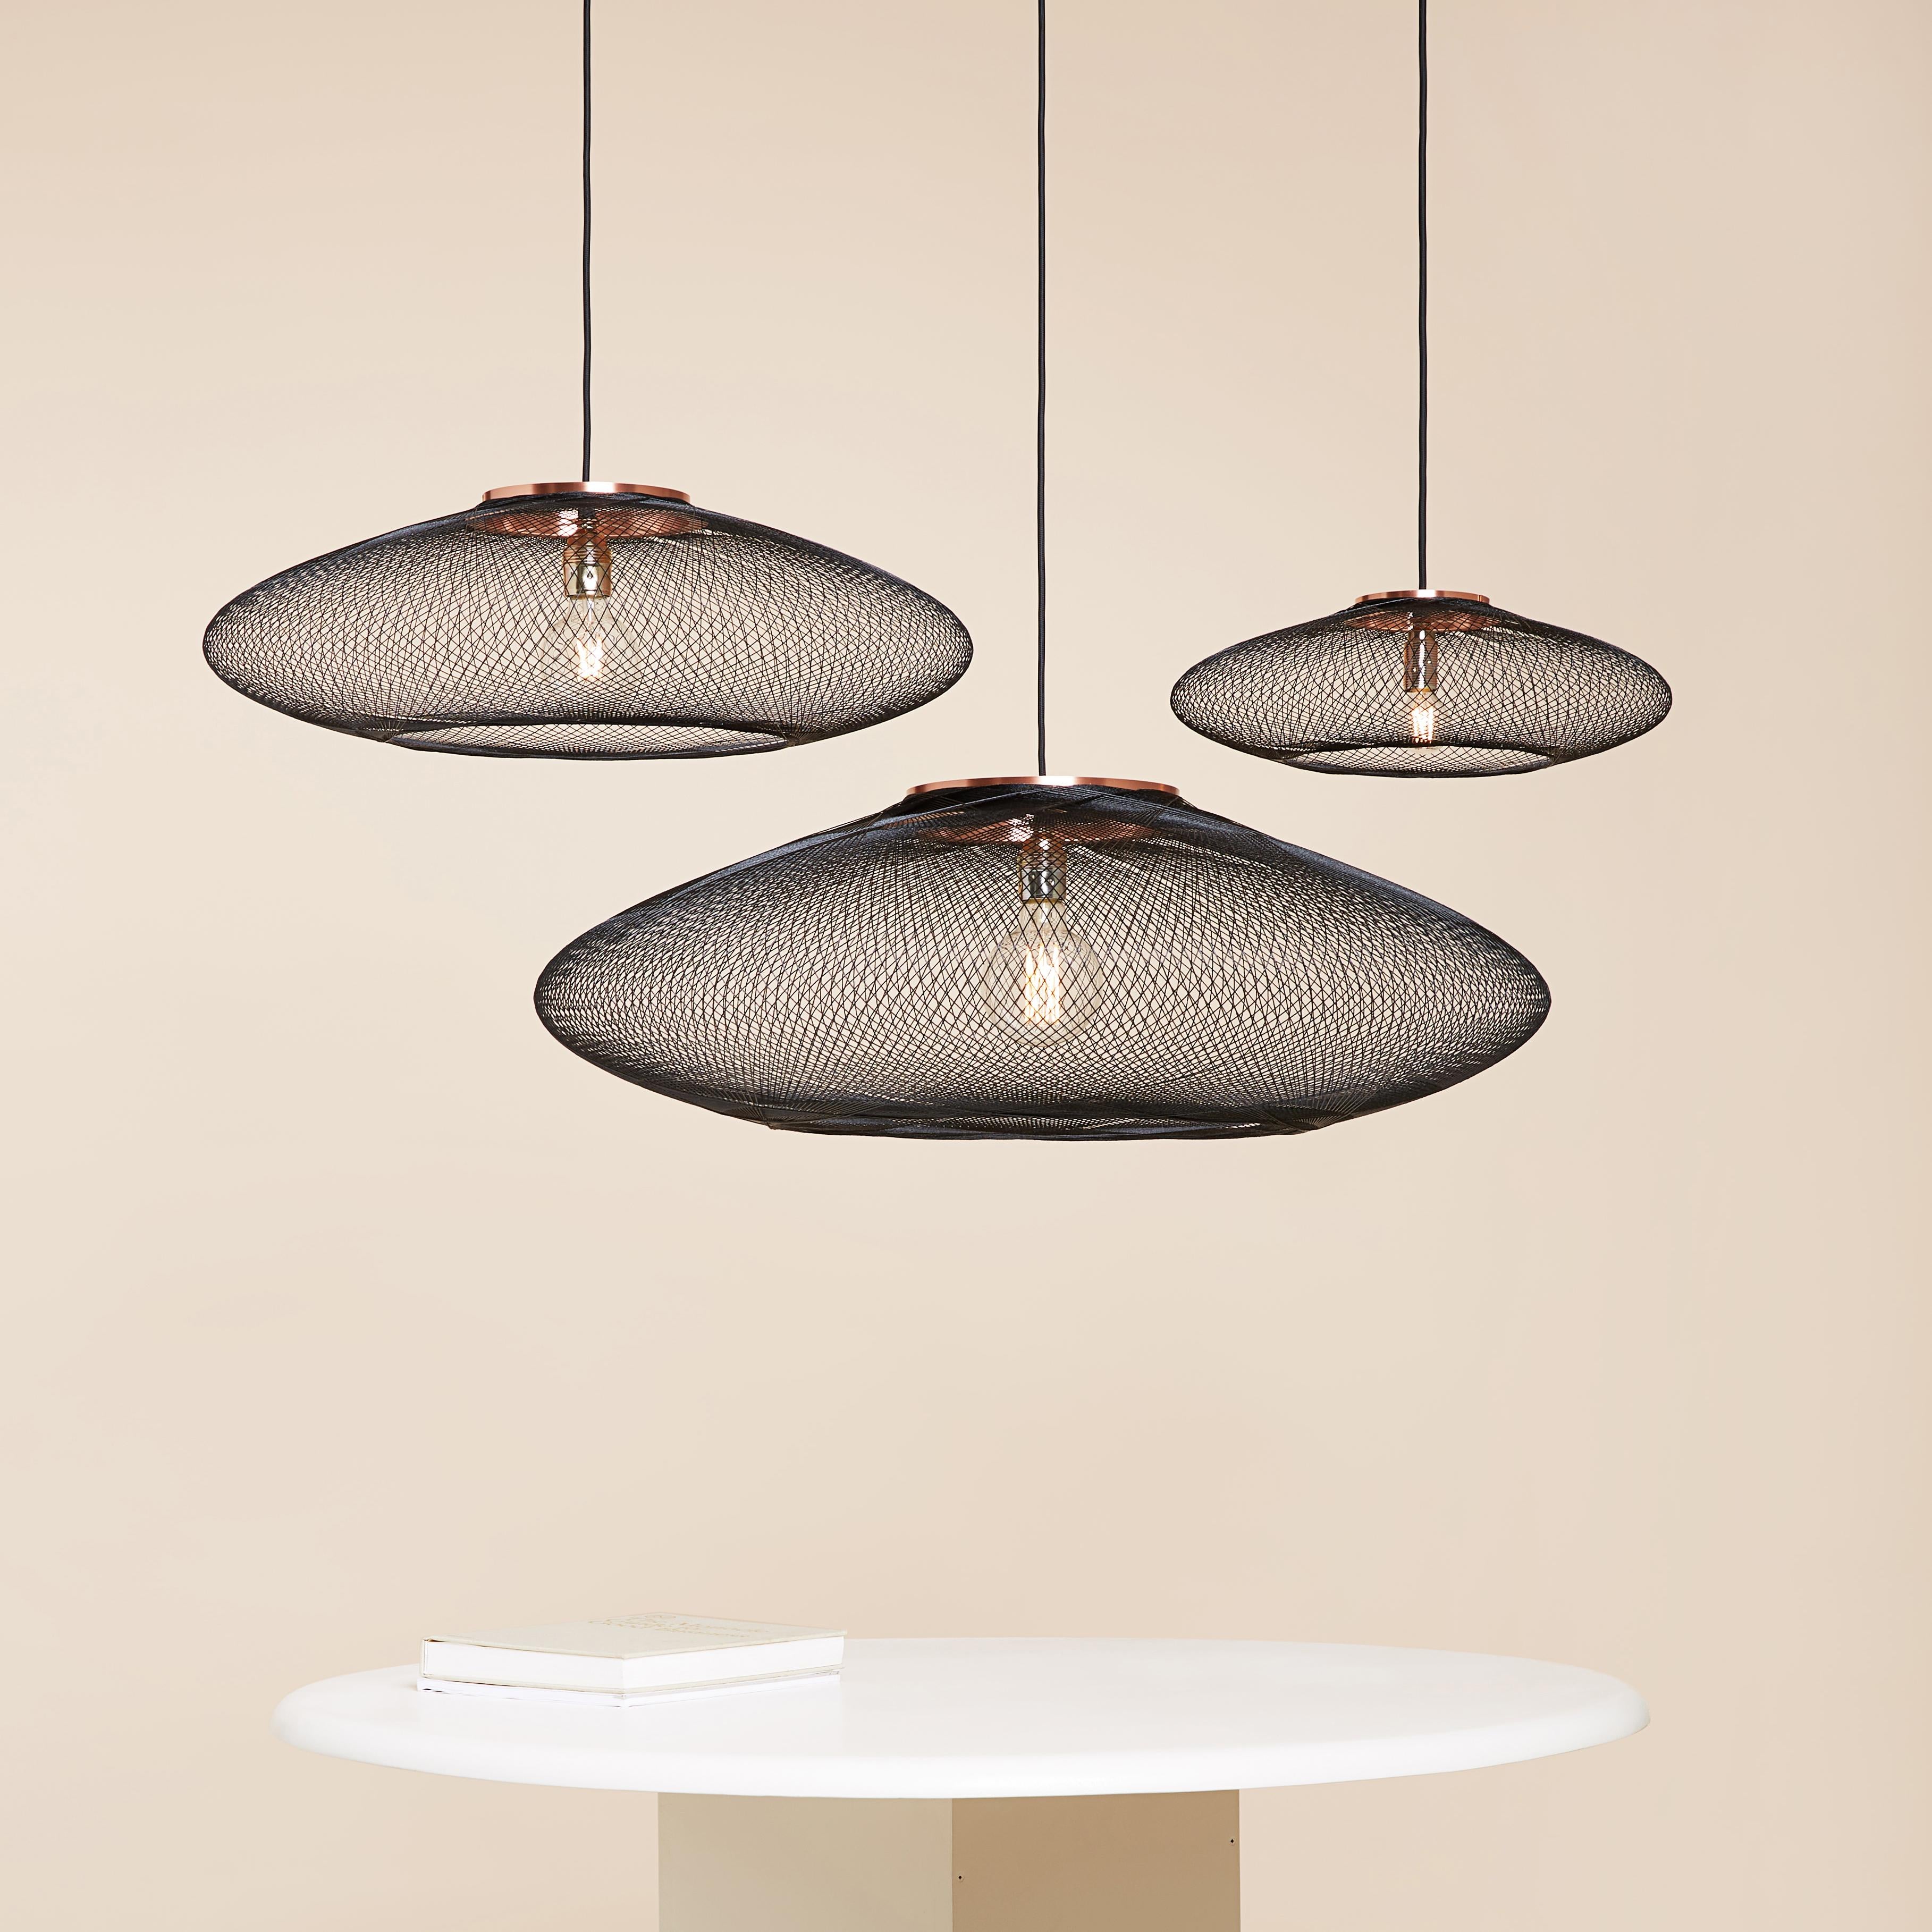 Medium Black UFO pendant lamp by Atelier Robotiq
Dimensions: D 60 x H 18 cm
Materials: Resin-impregnated industrial fiber, copper.
Available with holder in copper/ brass/ black coated stainless steel.
Available in different colors, 3 sizes, and in